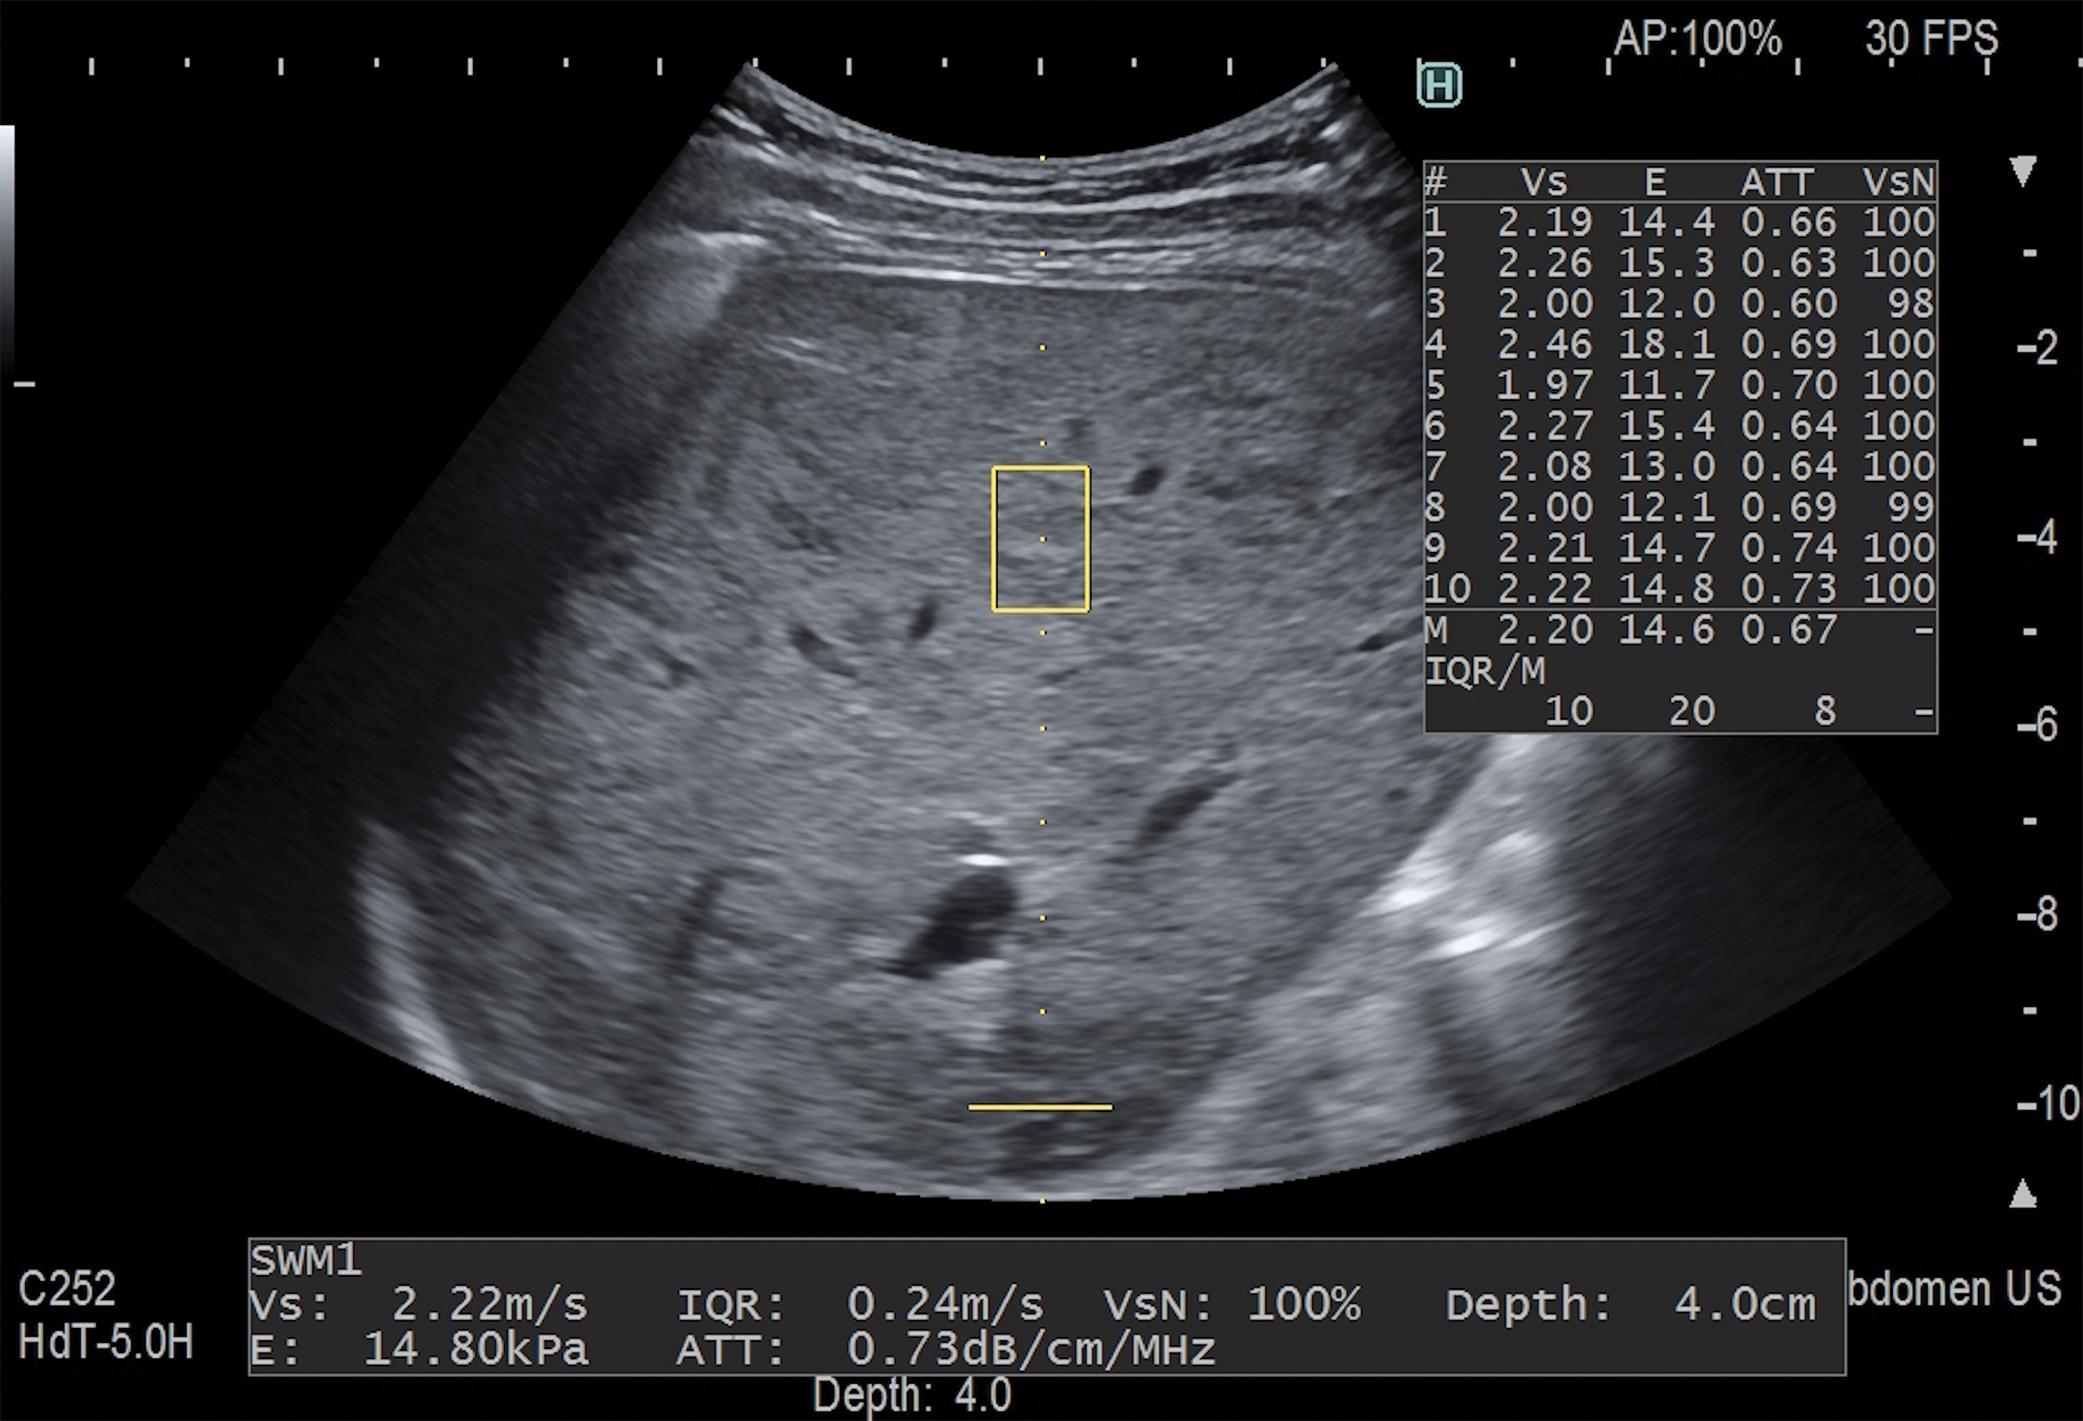 Fig. 7.1, Asymptomatic 48-year-old woman with chronic hepatitis B and normal laboratory tests. A point shear wave elastography technique (SWM, Arietta 850 ultrasound system, Fujifilm Healthcare previously Hitachi Ltd) shows that the median liver stiffness value is 14.6 kPa, which indicates compensated advanced chronic liver disease. The measurement is of good quality (IQR/M: 20%), and the quality criterion provided by the manufacturer for each acquisition, VsN, is fulfilled for all acquisitions (range: 98%–100%). IQR/M, Interquartile range/median.